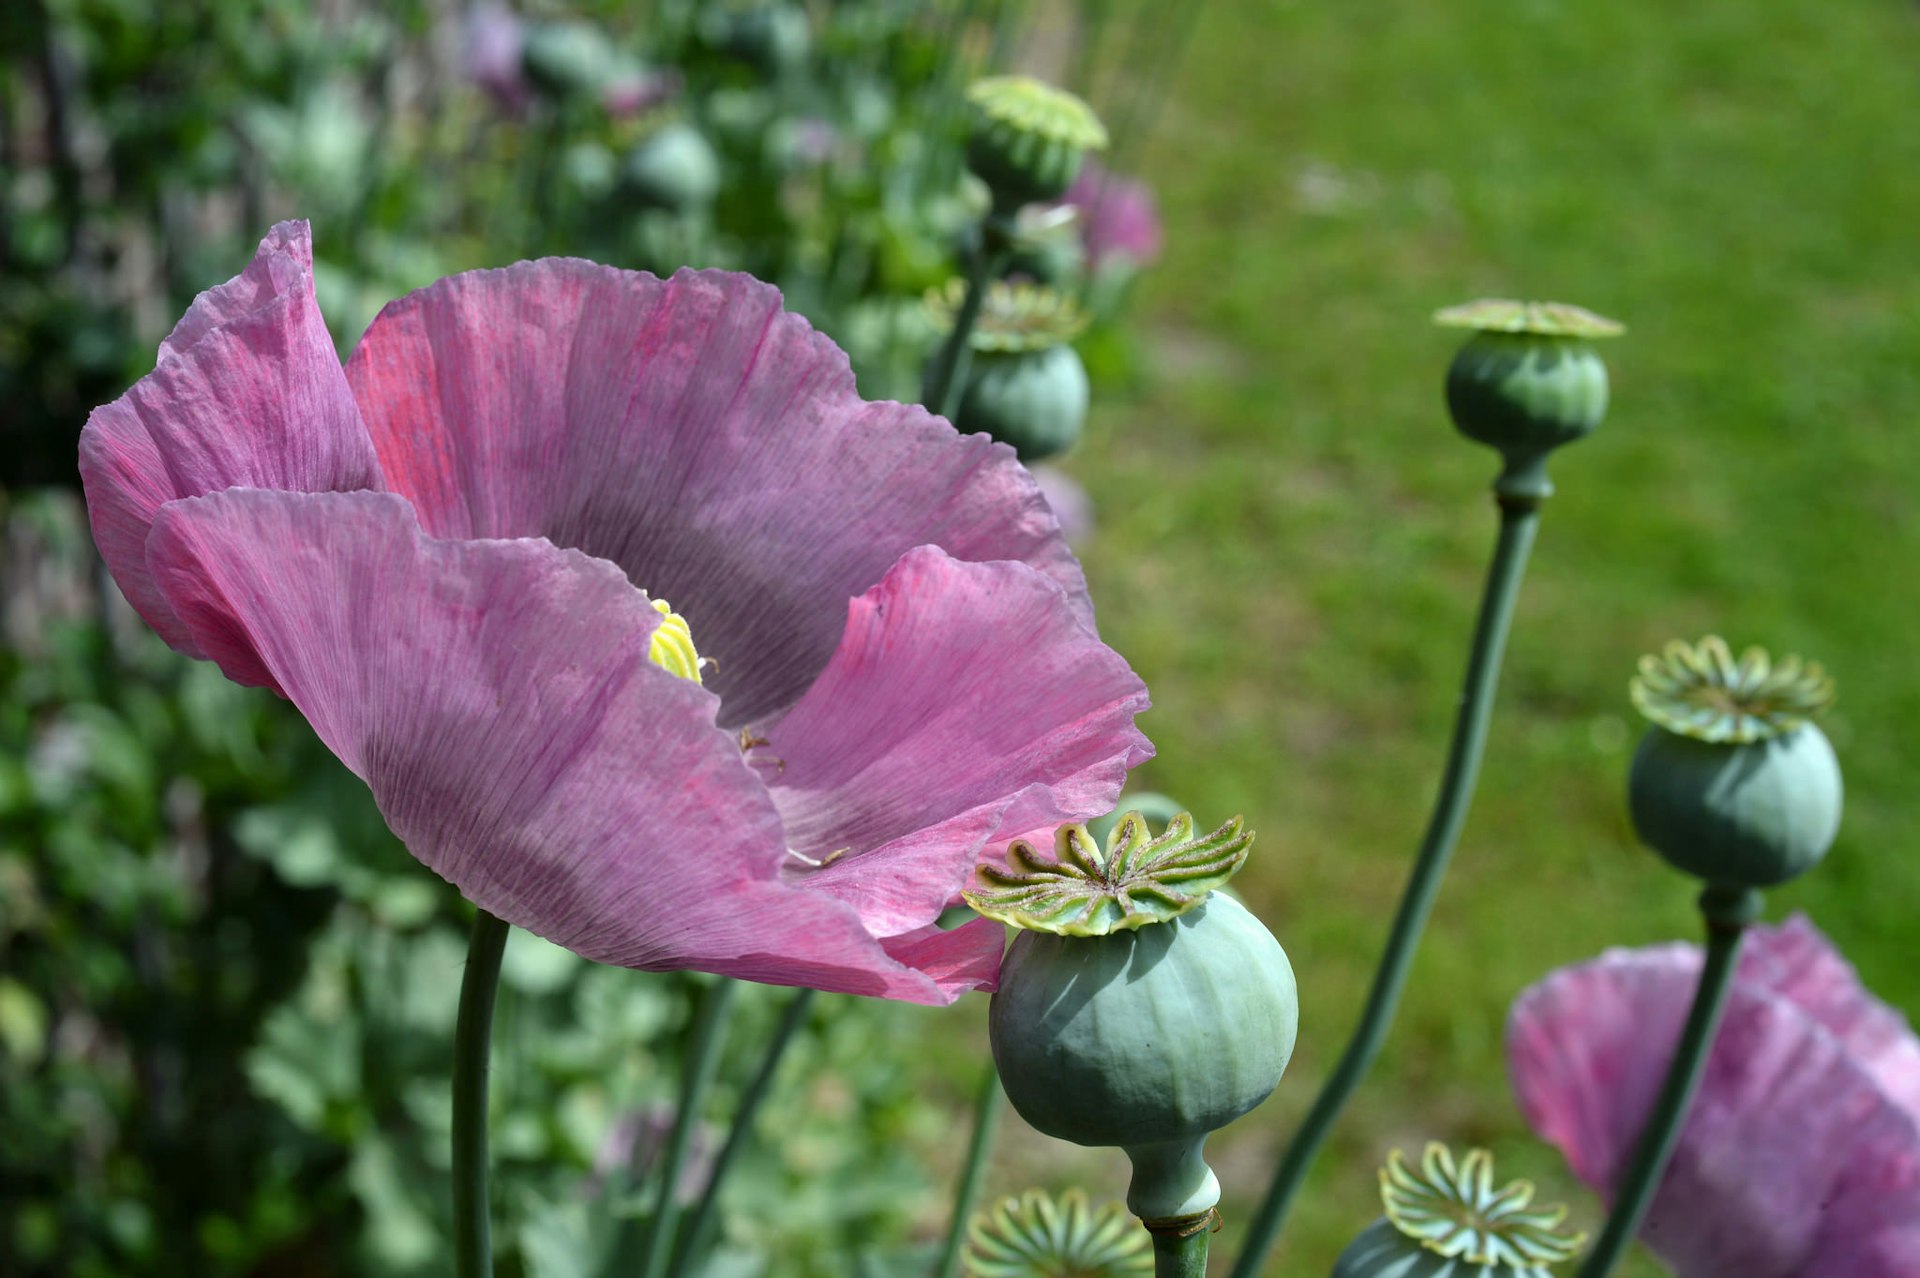 Researchers Produce Opioid Pain Killer From Genetically Modified Yeast With Opium Poppy Genes